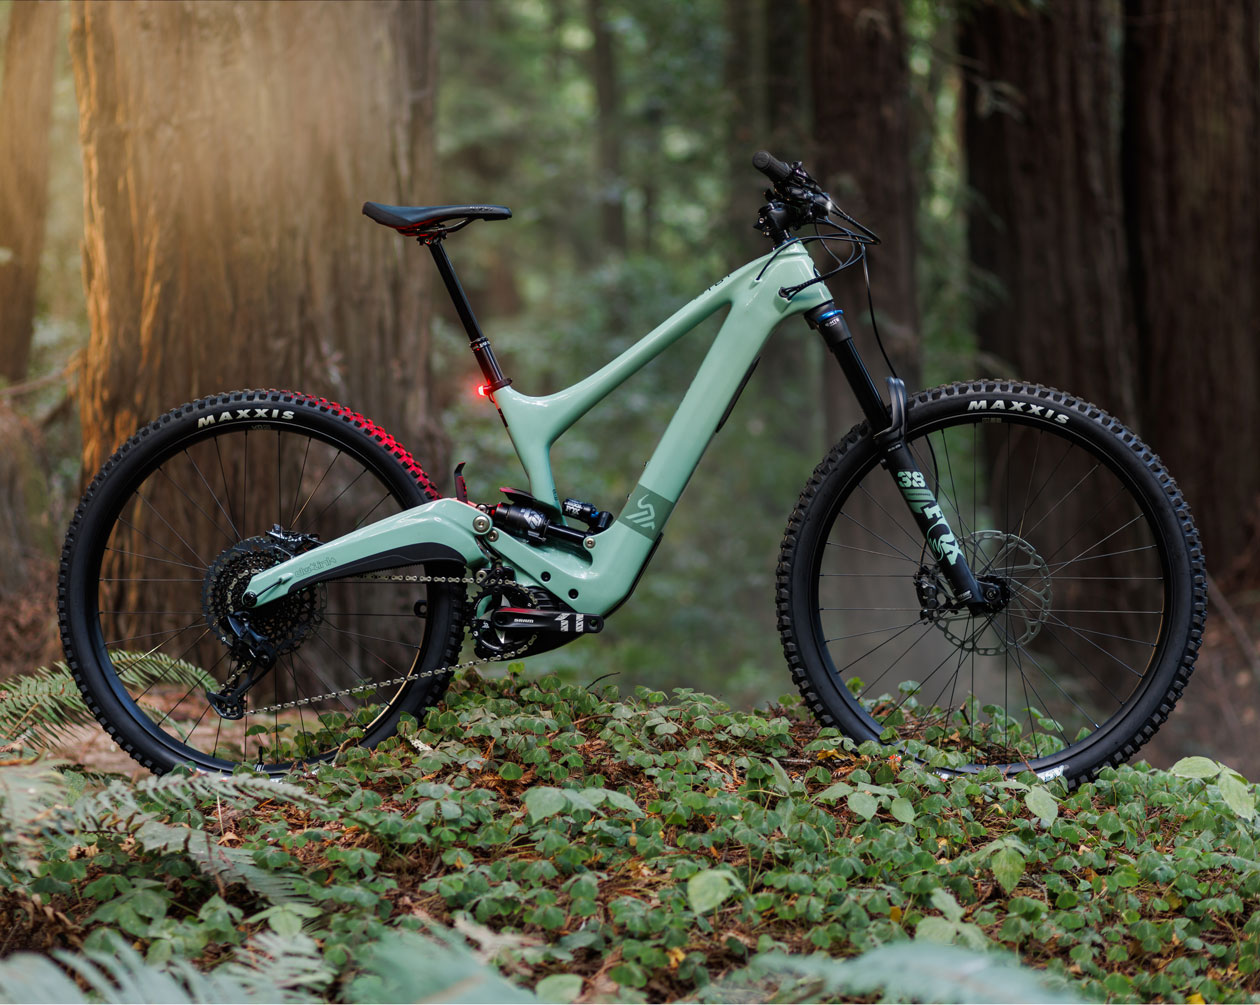 The new Ibis Oso eMTB